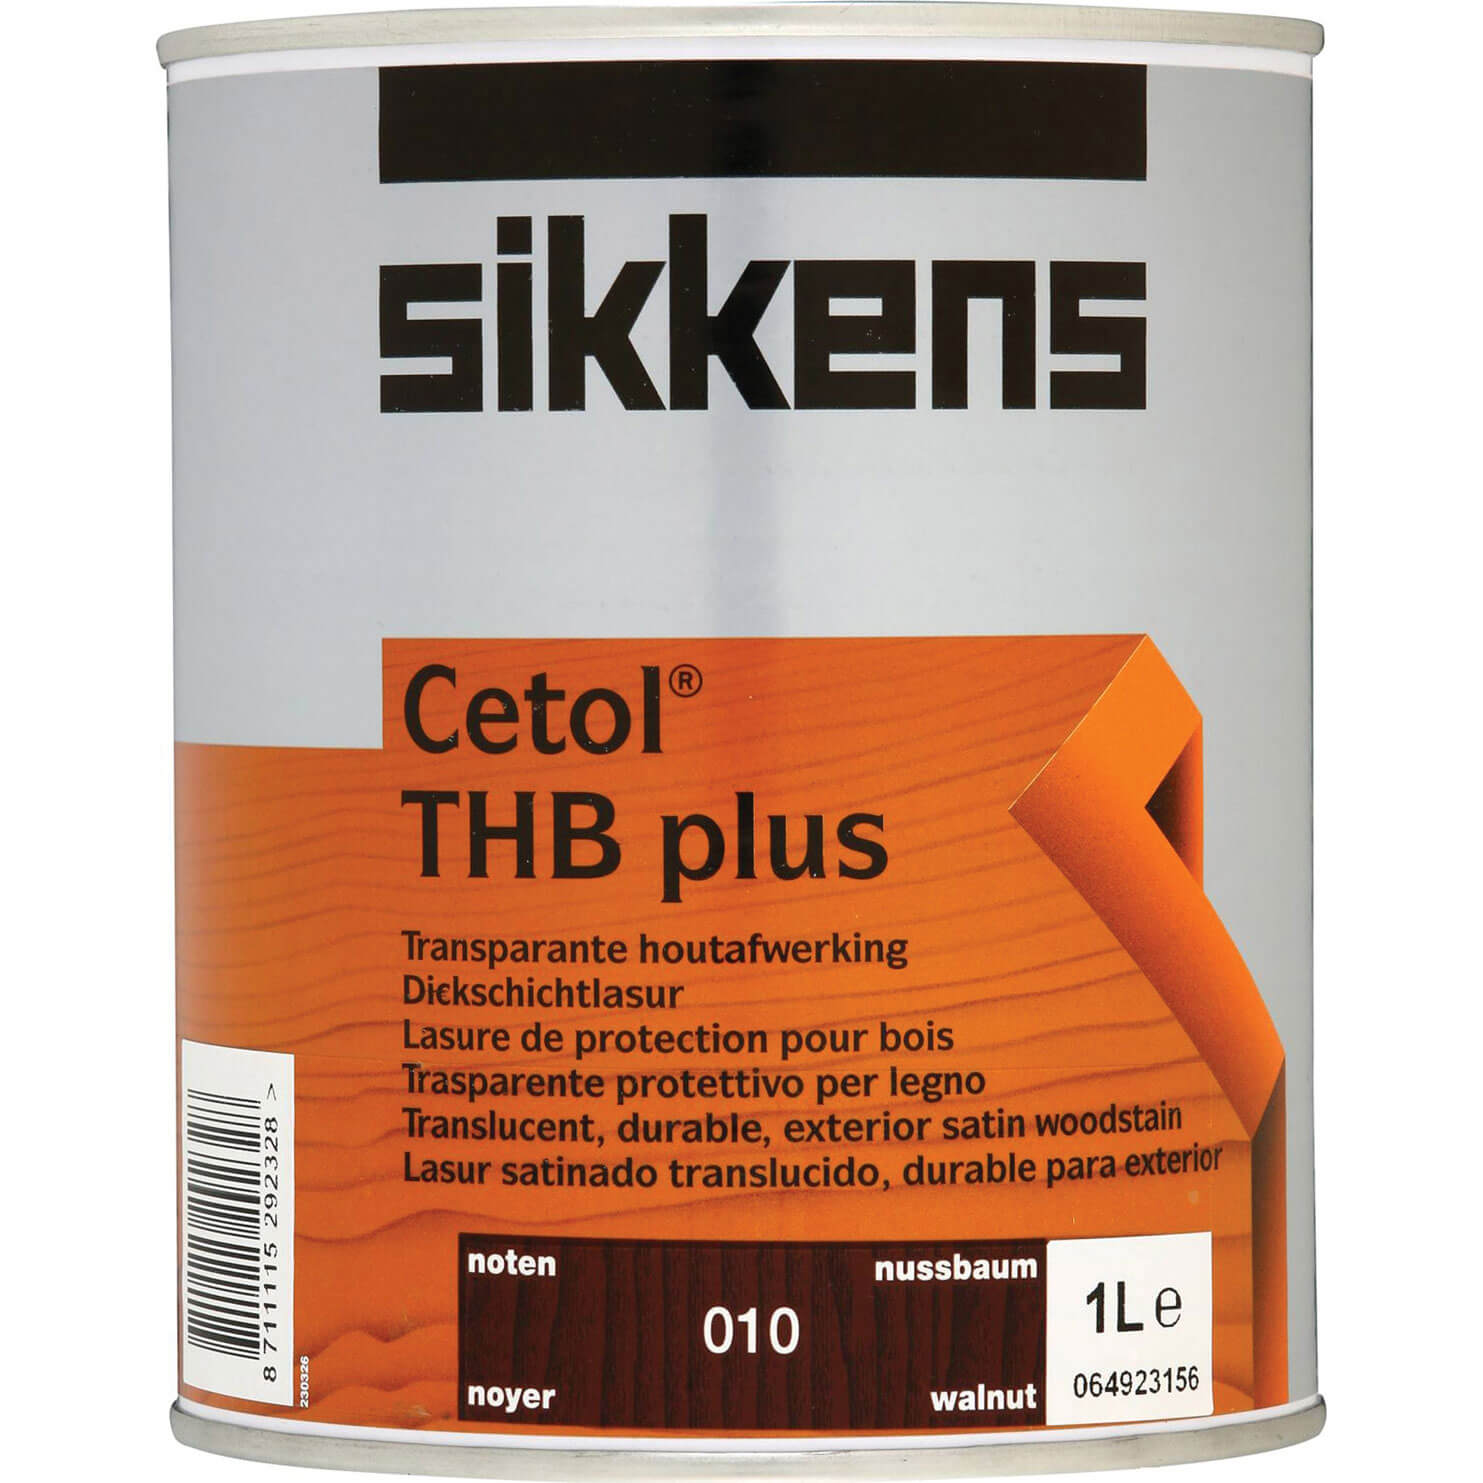 Sikkens Cetol TBH Plus Translucent Wood Stain Walnut 1 Litre